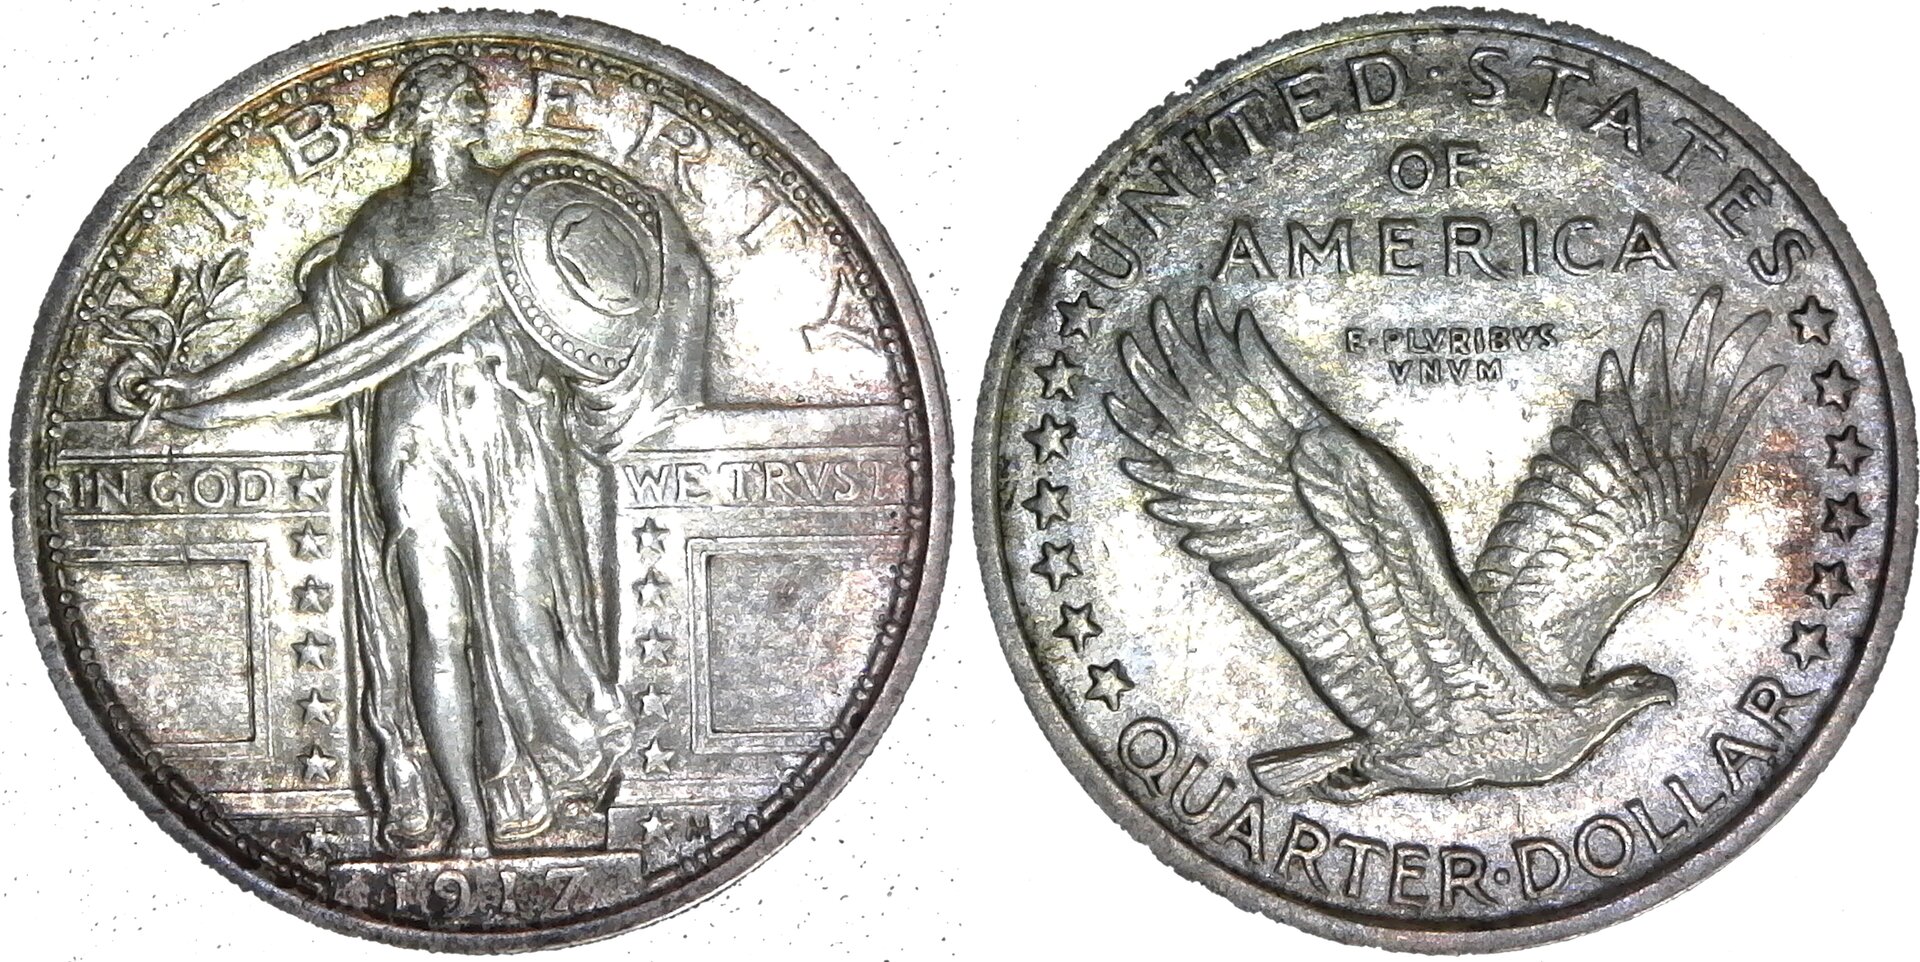 United States 25 Cents Standing Liberty Quarter type 1 1917 obv-side-cutout.jpg